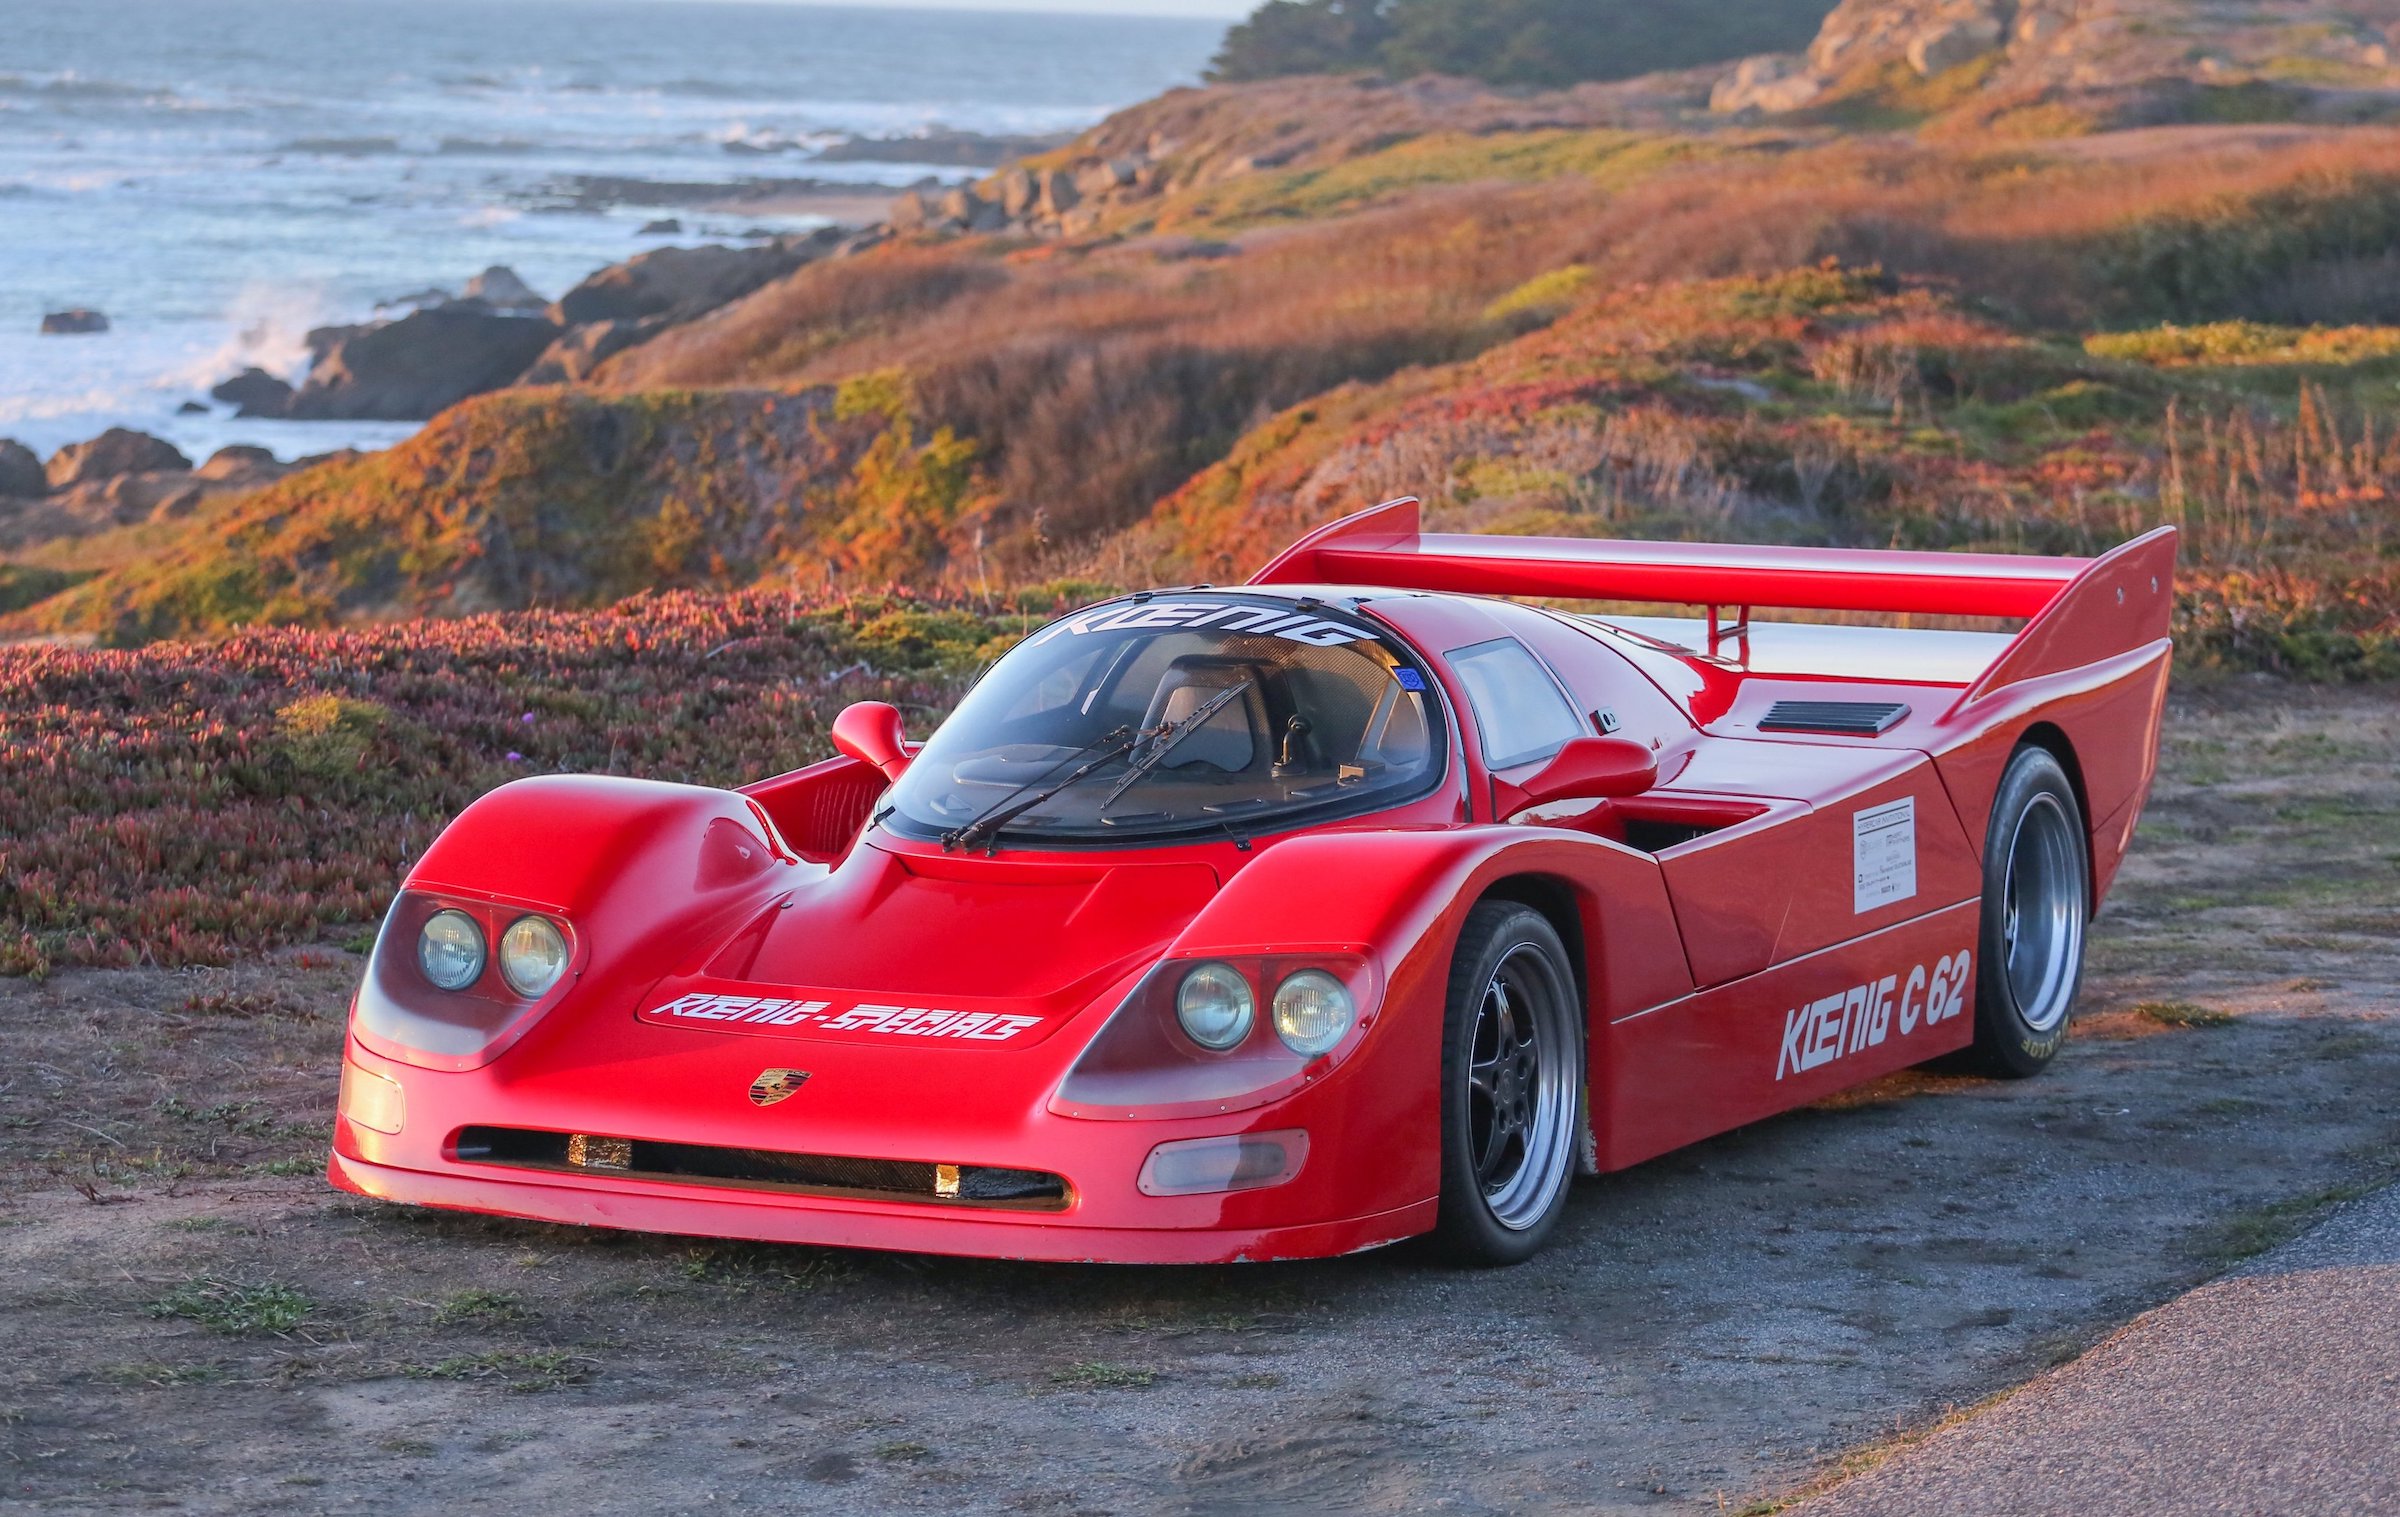 Turn your commute into Le Mans with this Koenig C62